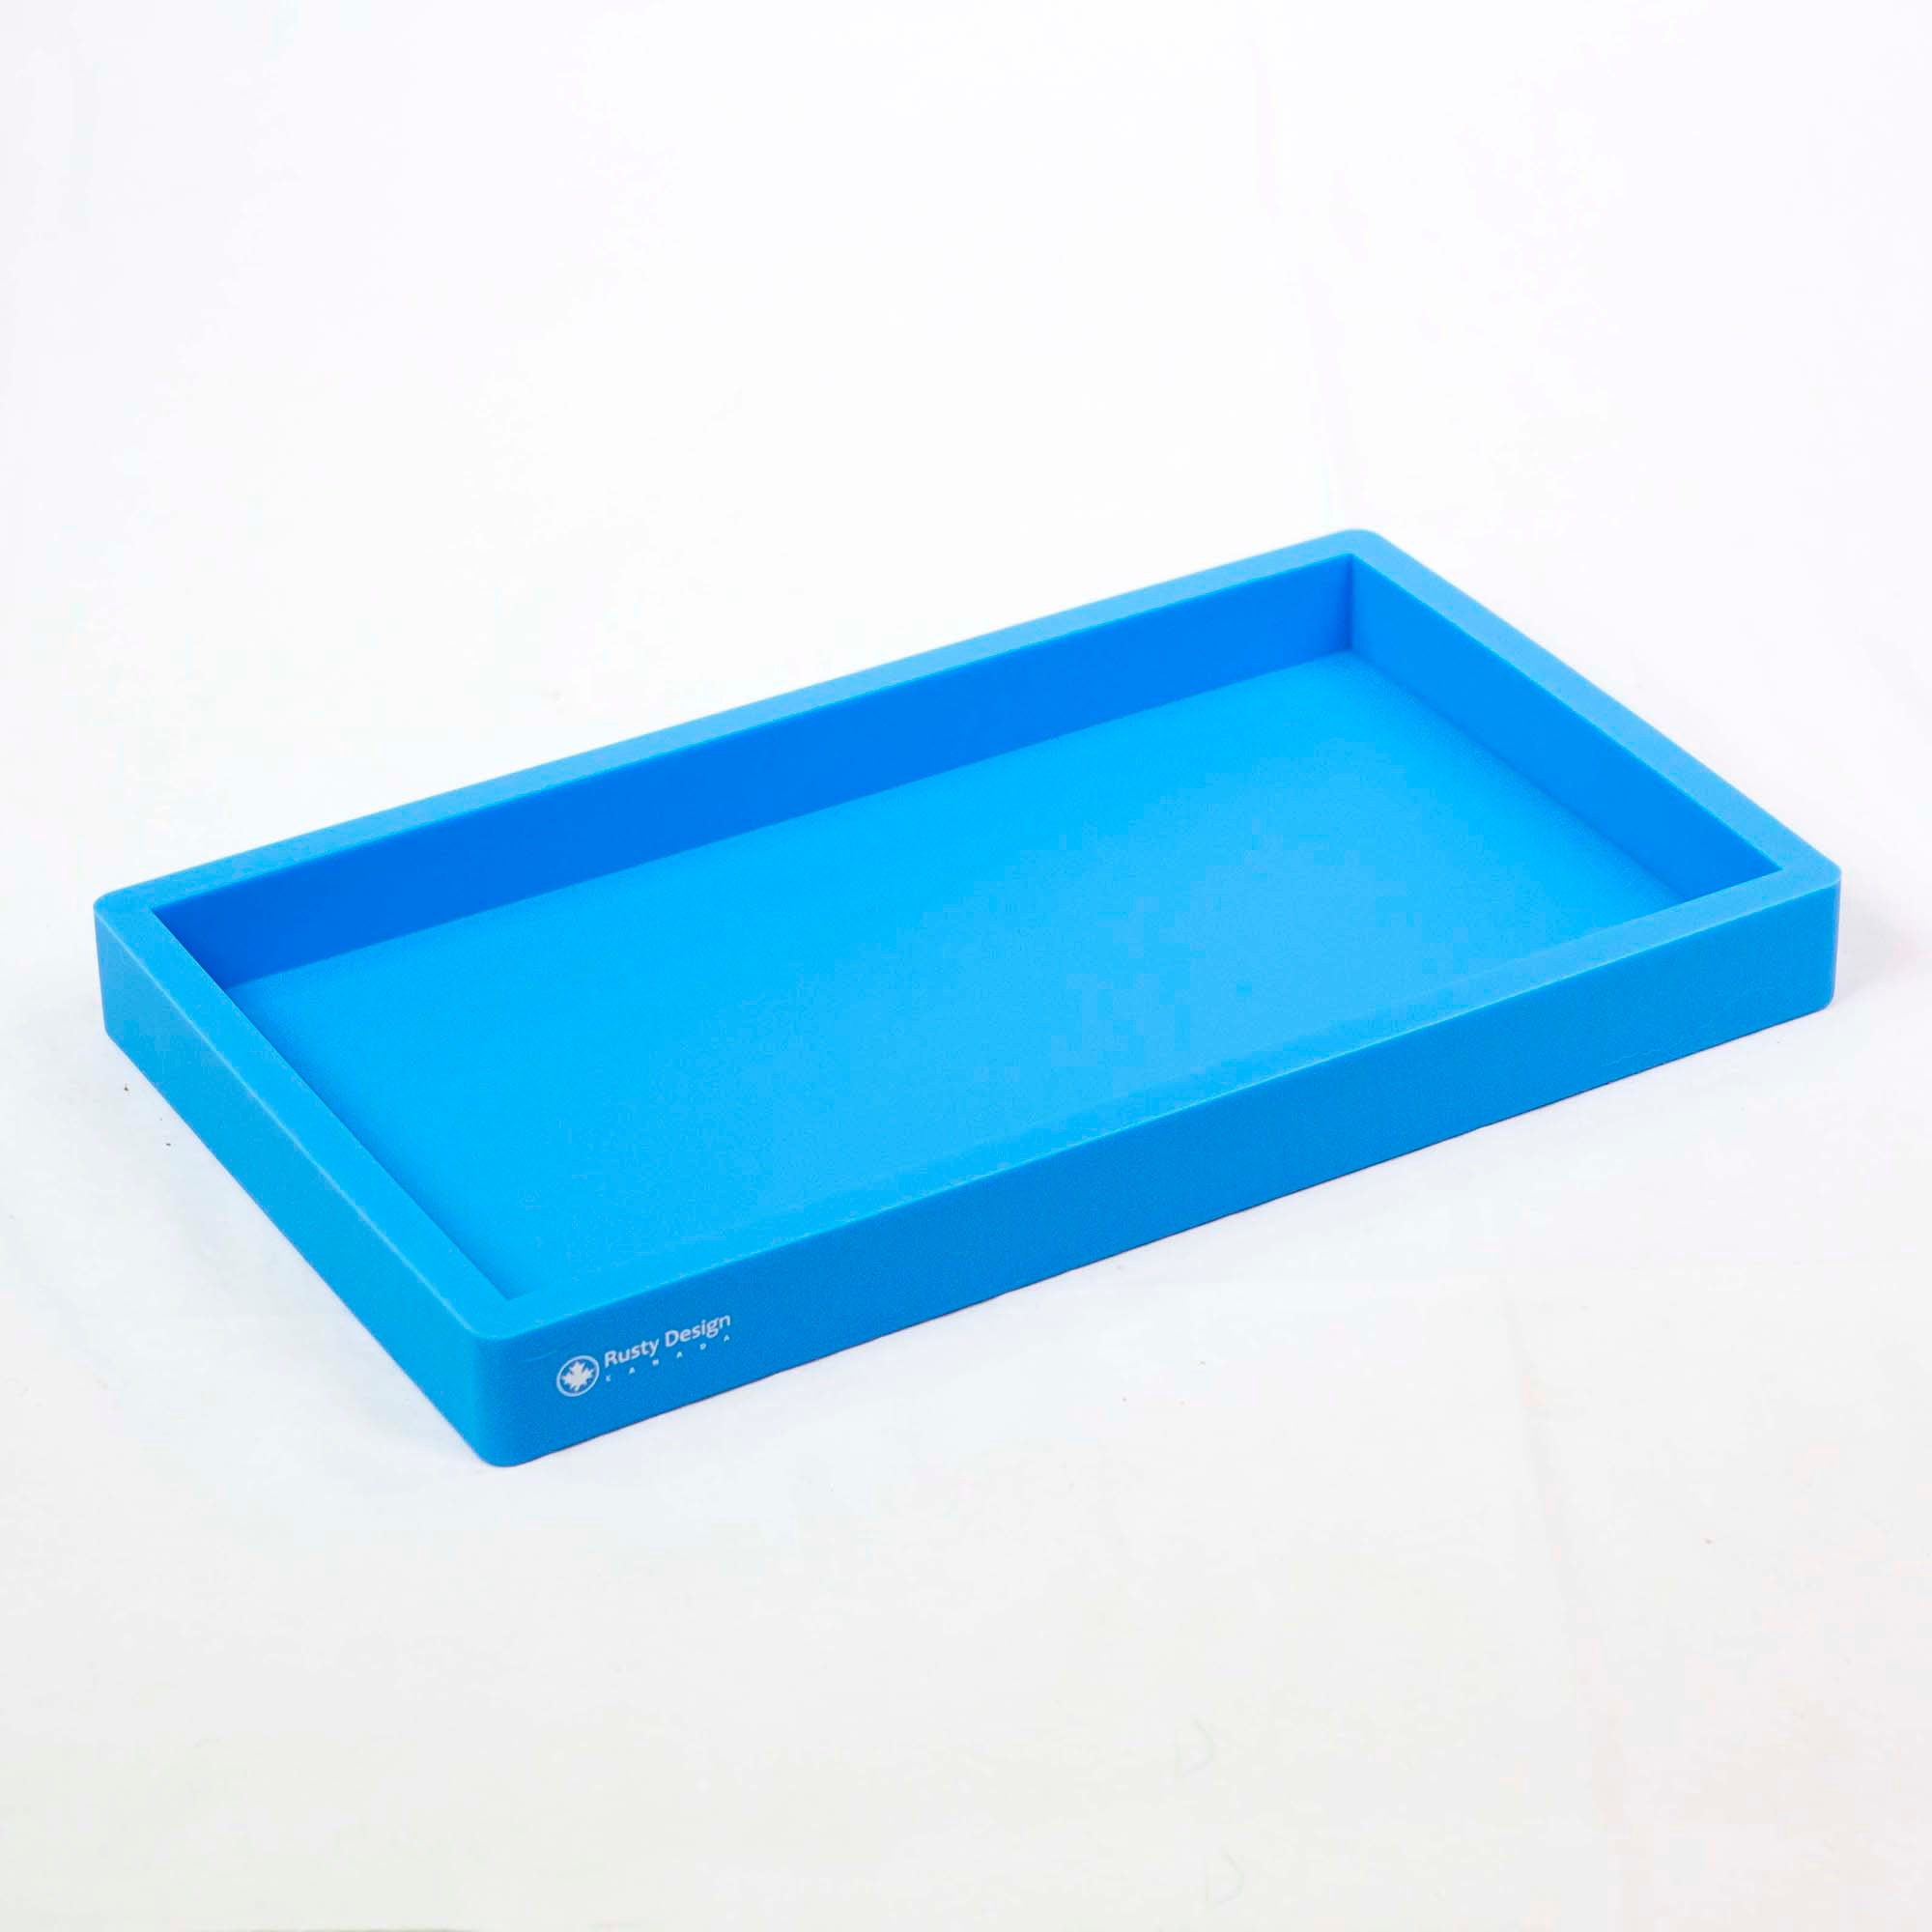 Custom Mold Divider Resin Epoxy Molds forms, Reusable Epoxy Resin HDPE  Forms for Forming Coffee Table, Cutting and Charcuterie Boards 